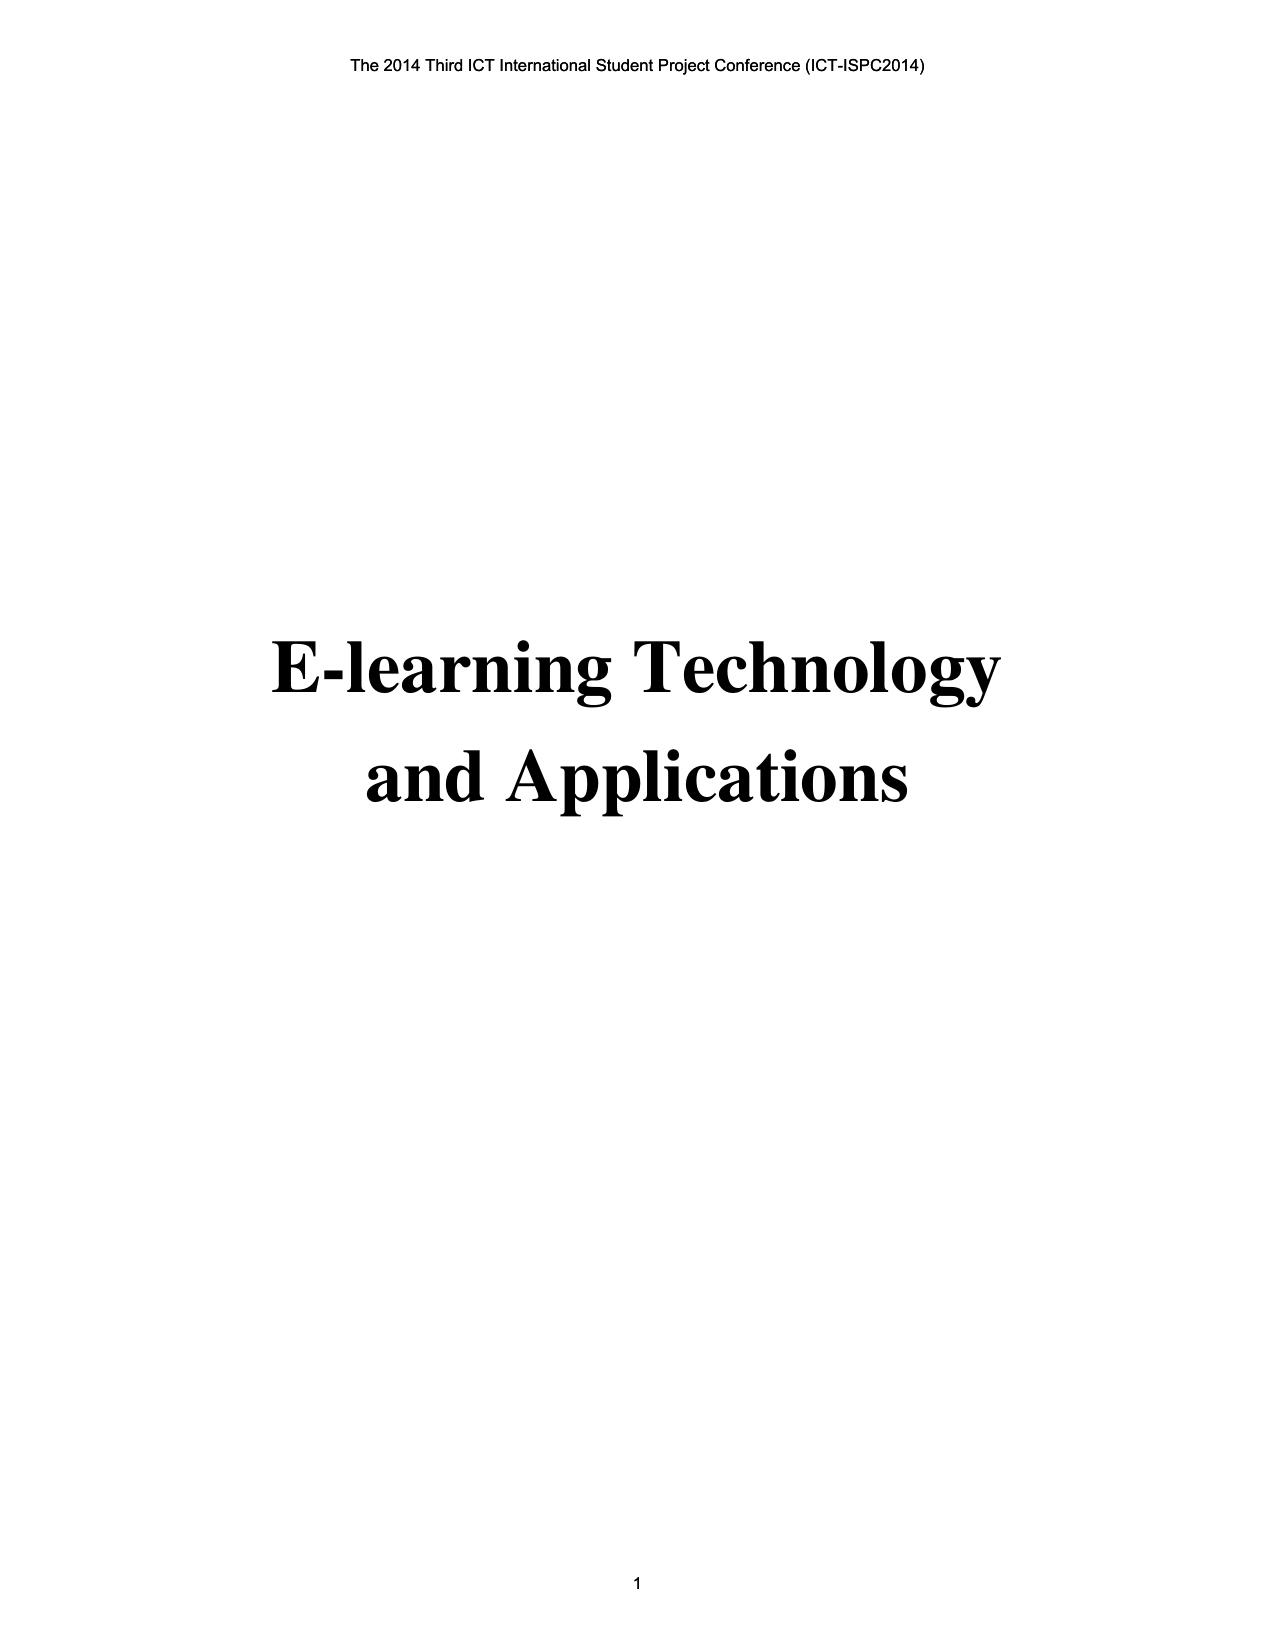 E-learning Technology and Applications 2014